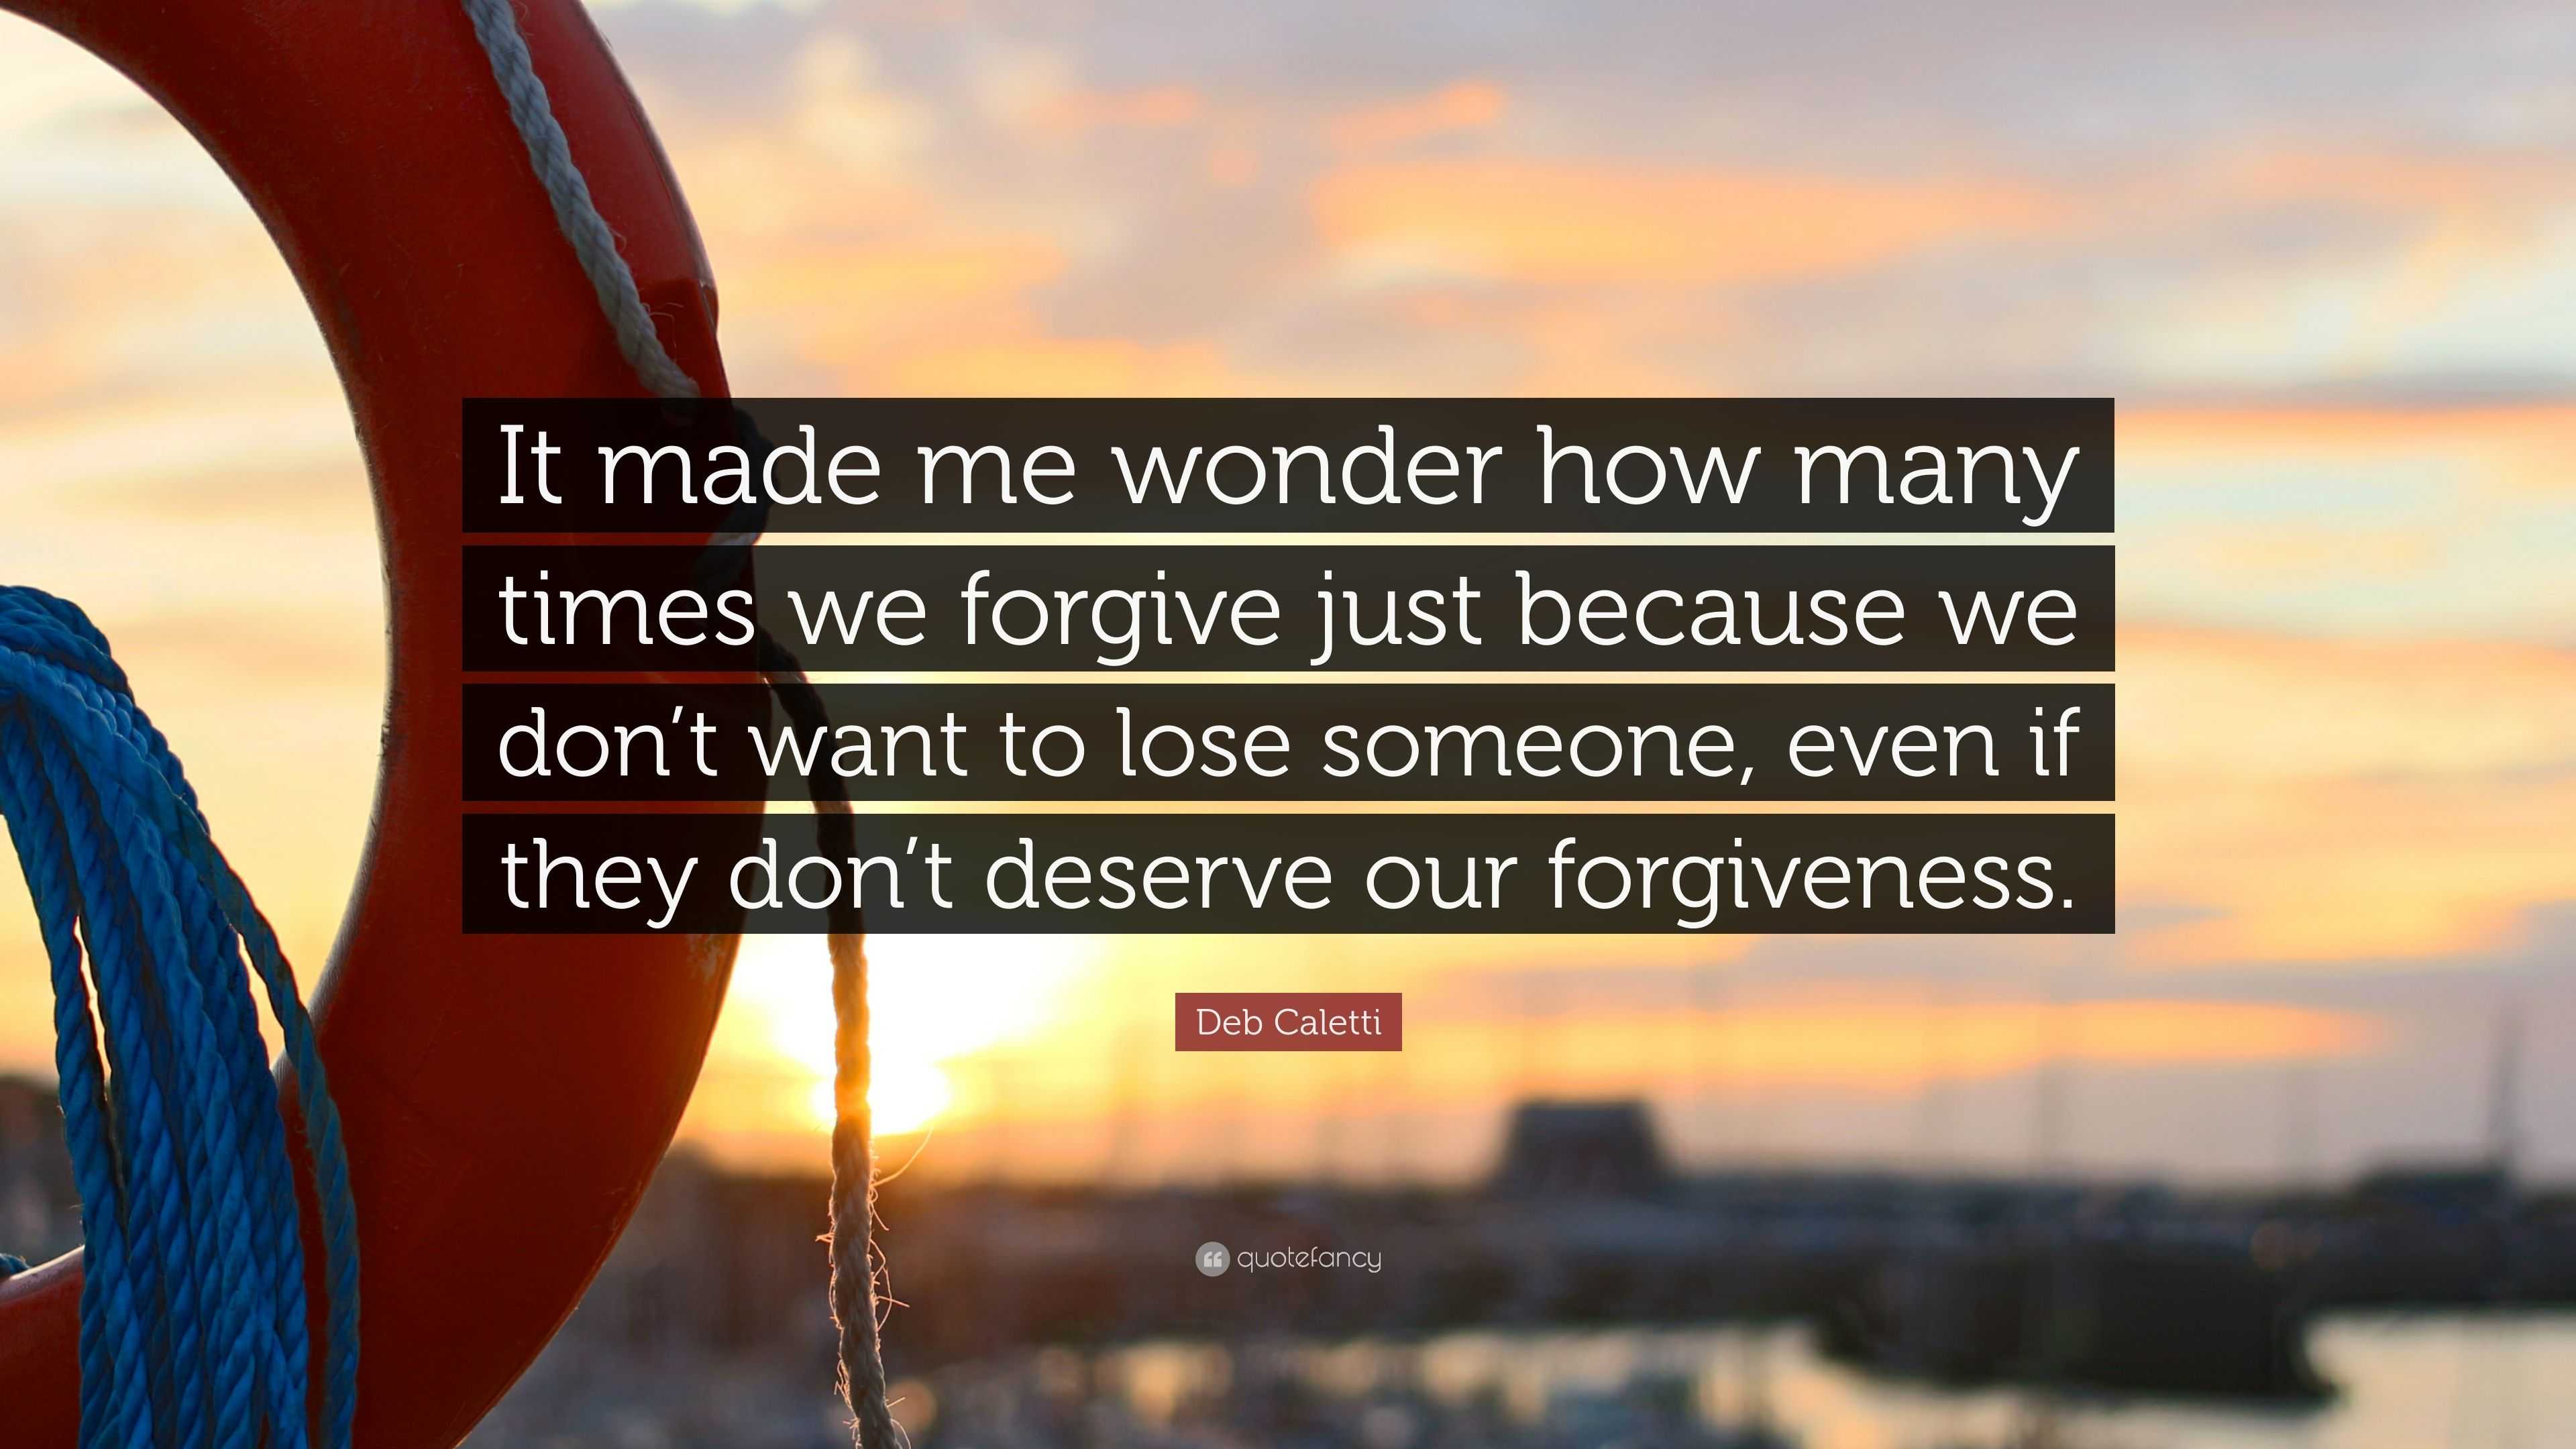 Deb Caletti Quote “It made me wonder how many times we forgive just because